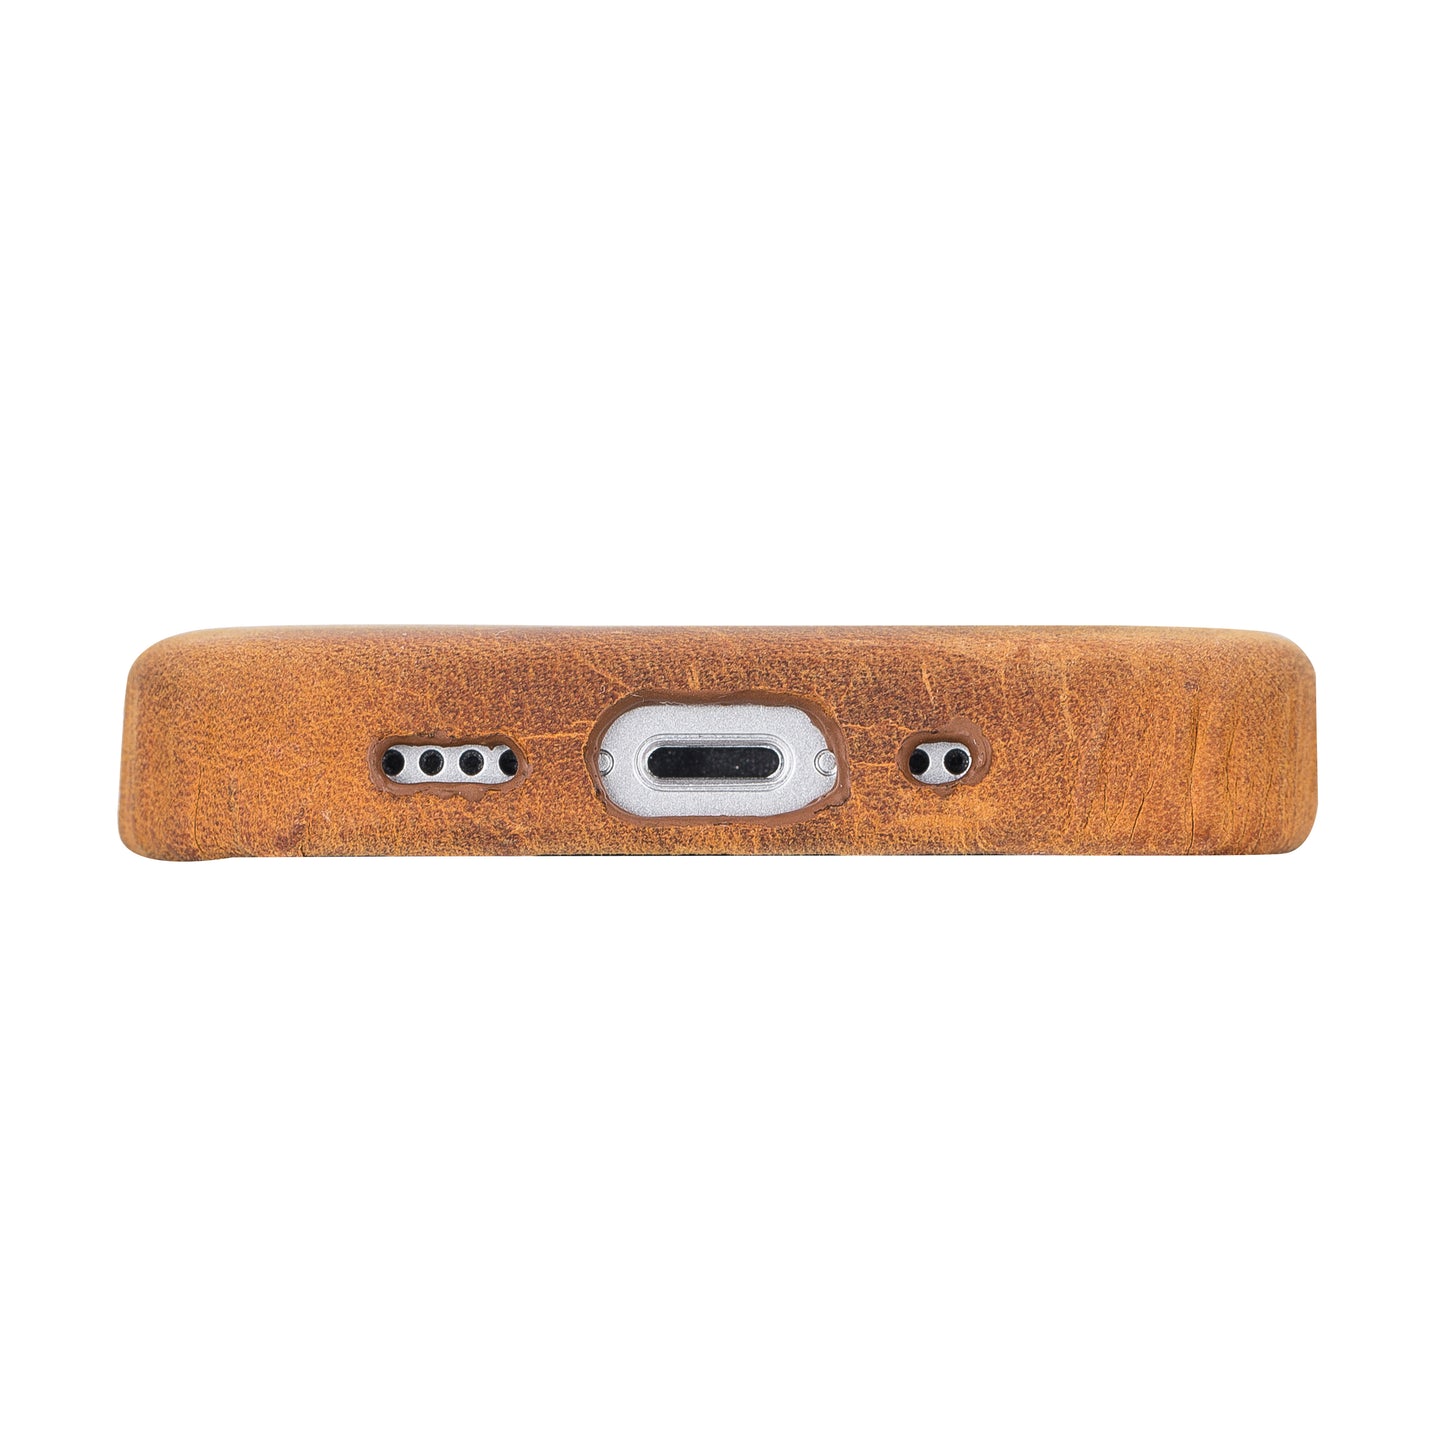 iPhone 13 Mini (5.4") Full Leather MagSafe Snap On Case  - Camel